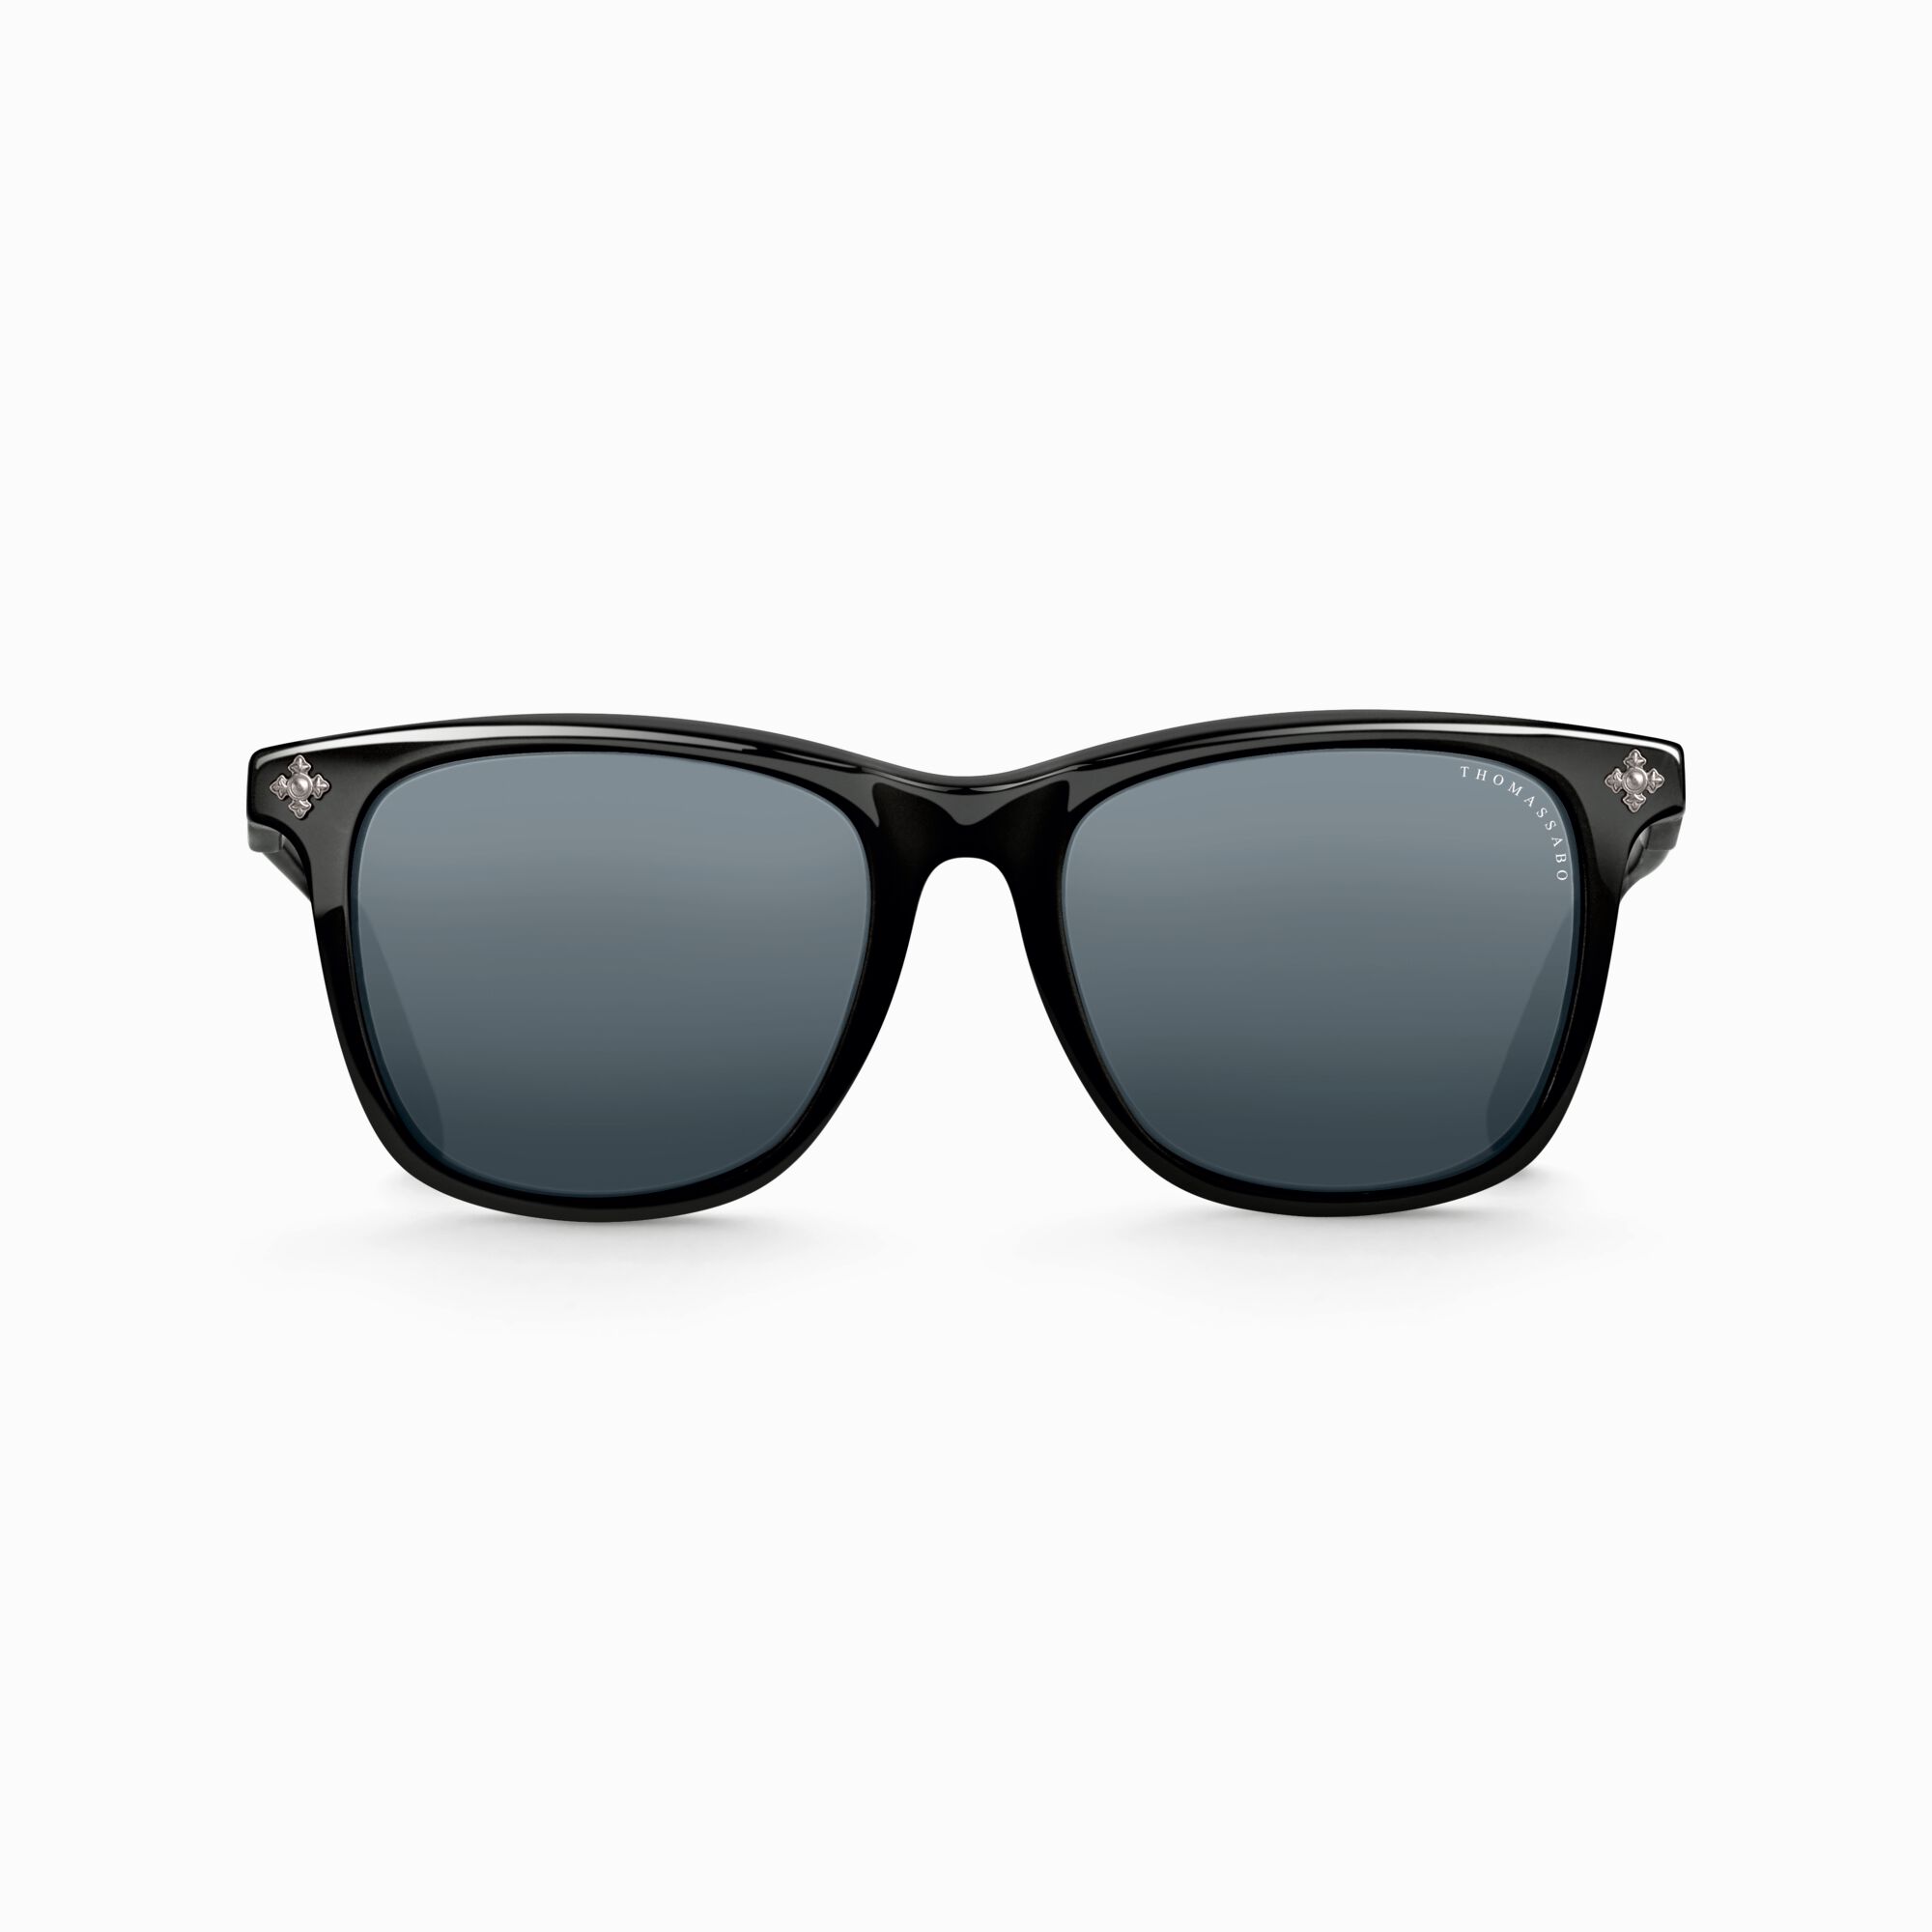 Sunglasses Marlon square cross polarised from the  collection in the THOMAS SABO online store